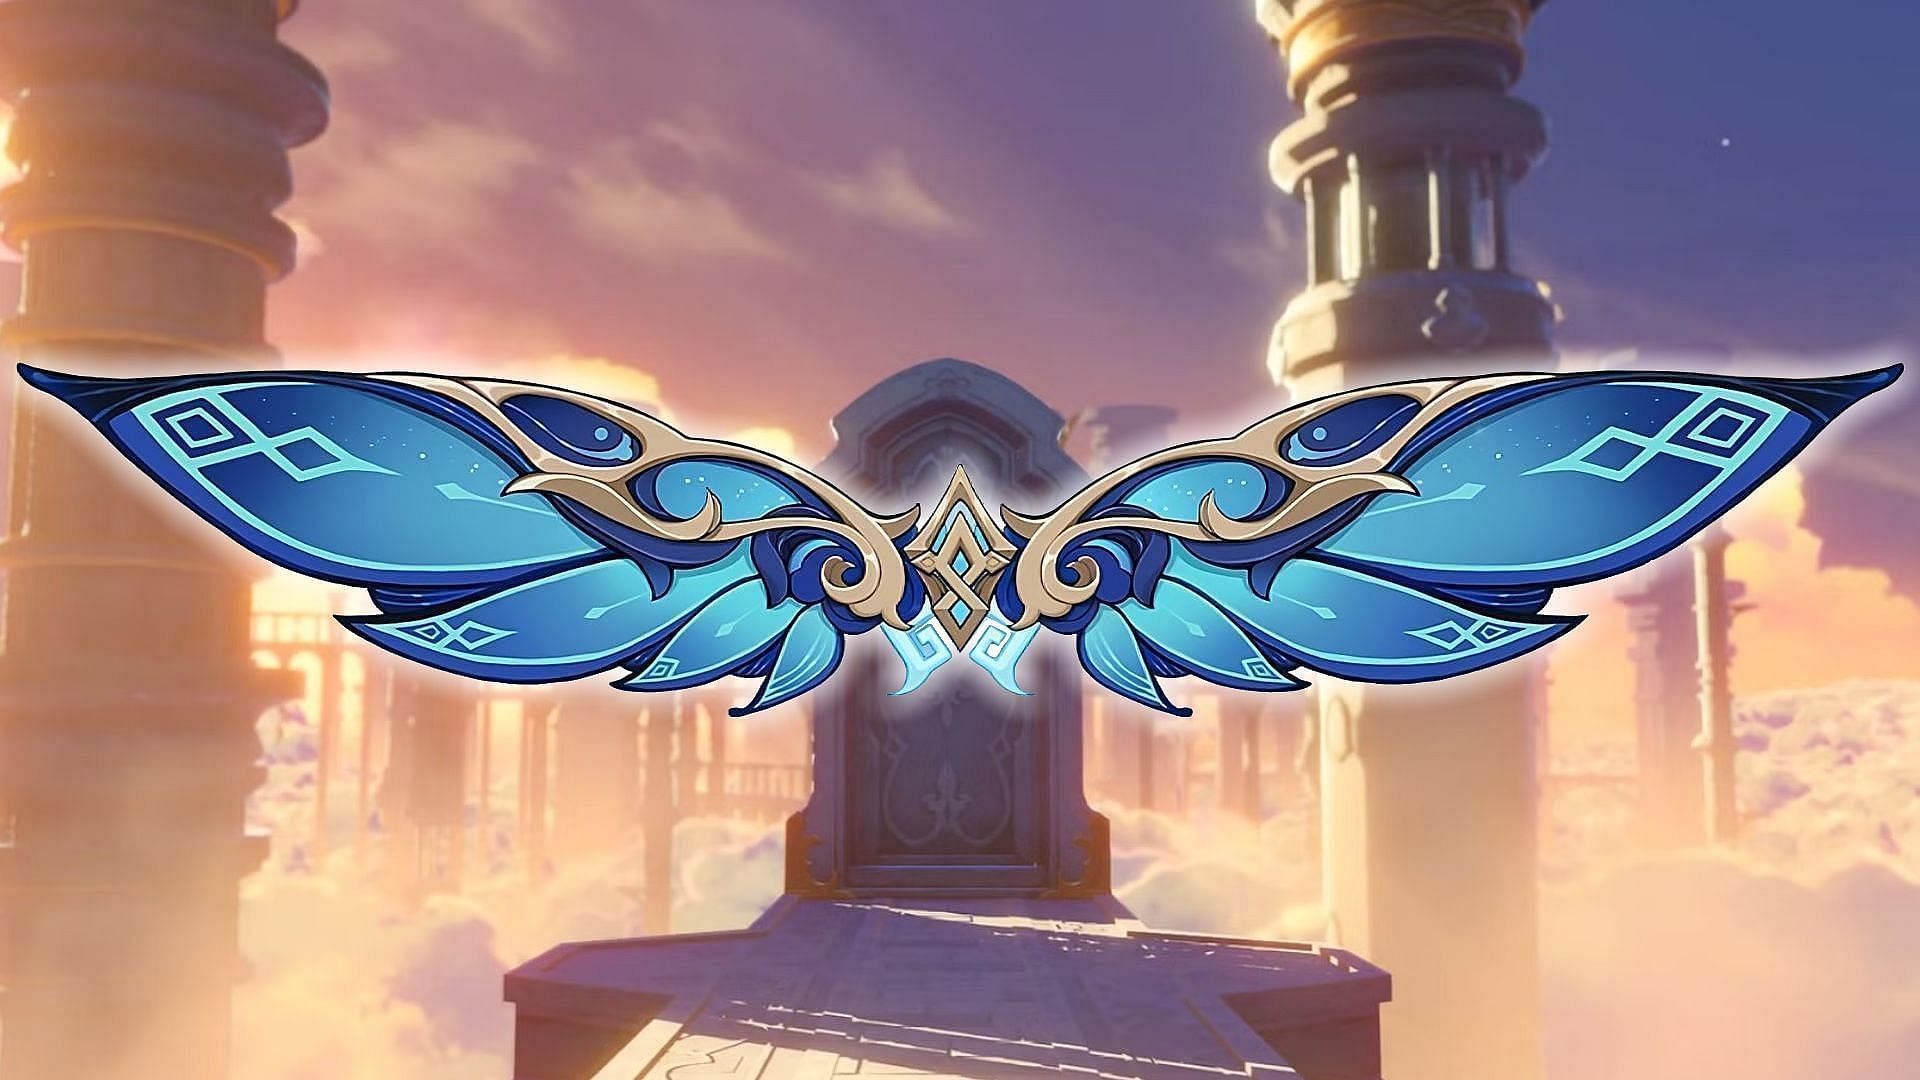 This is what the Prime Gaming wings looks like (Image via HoYoverse)